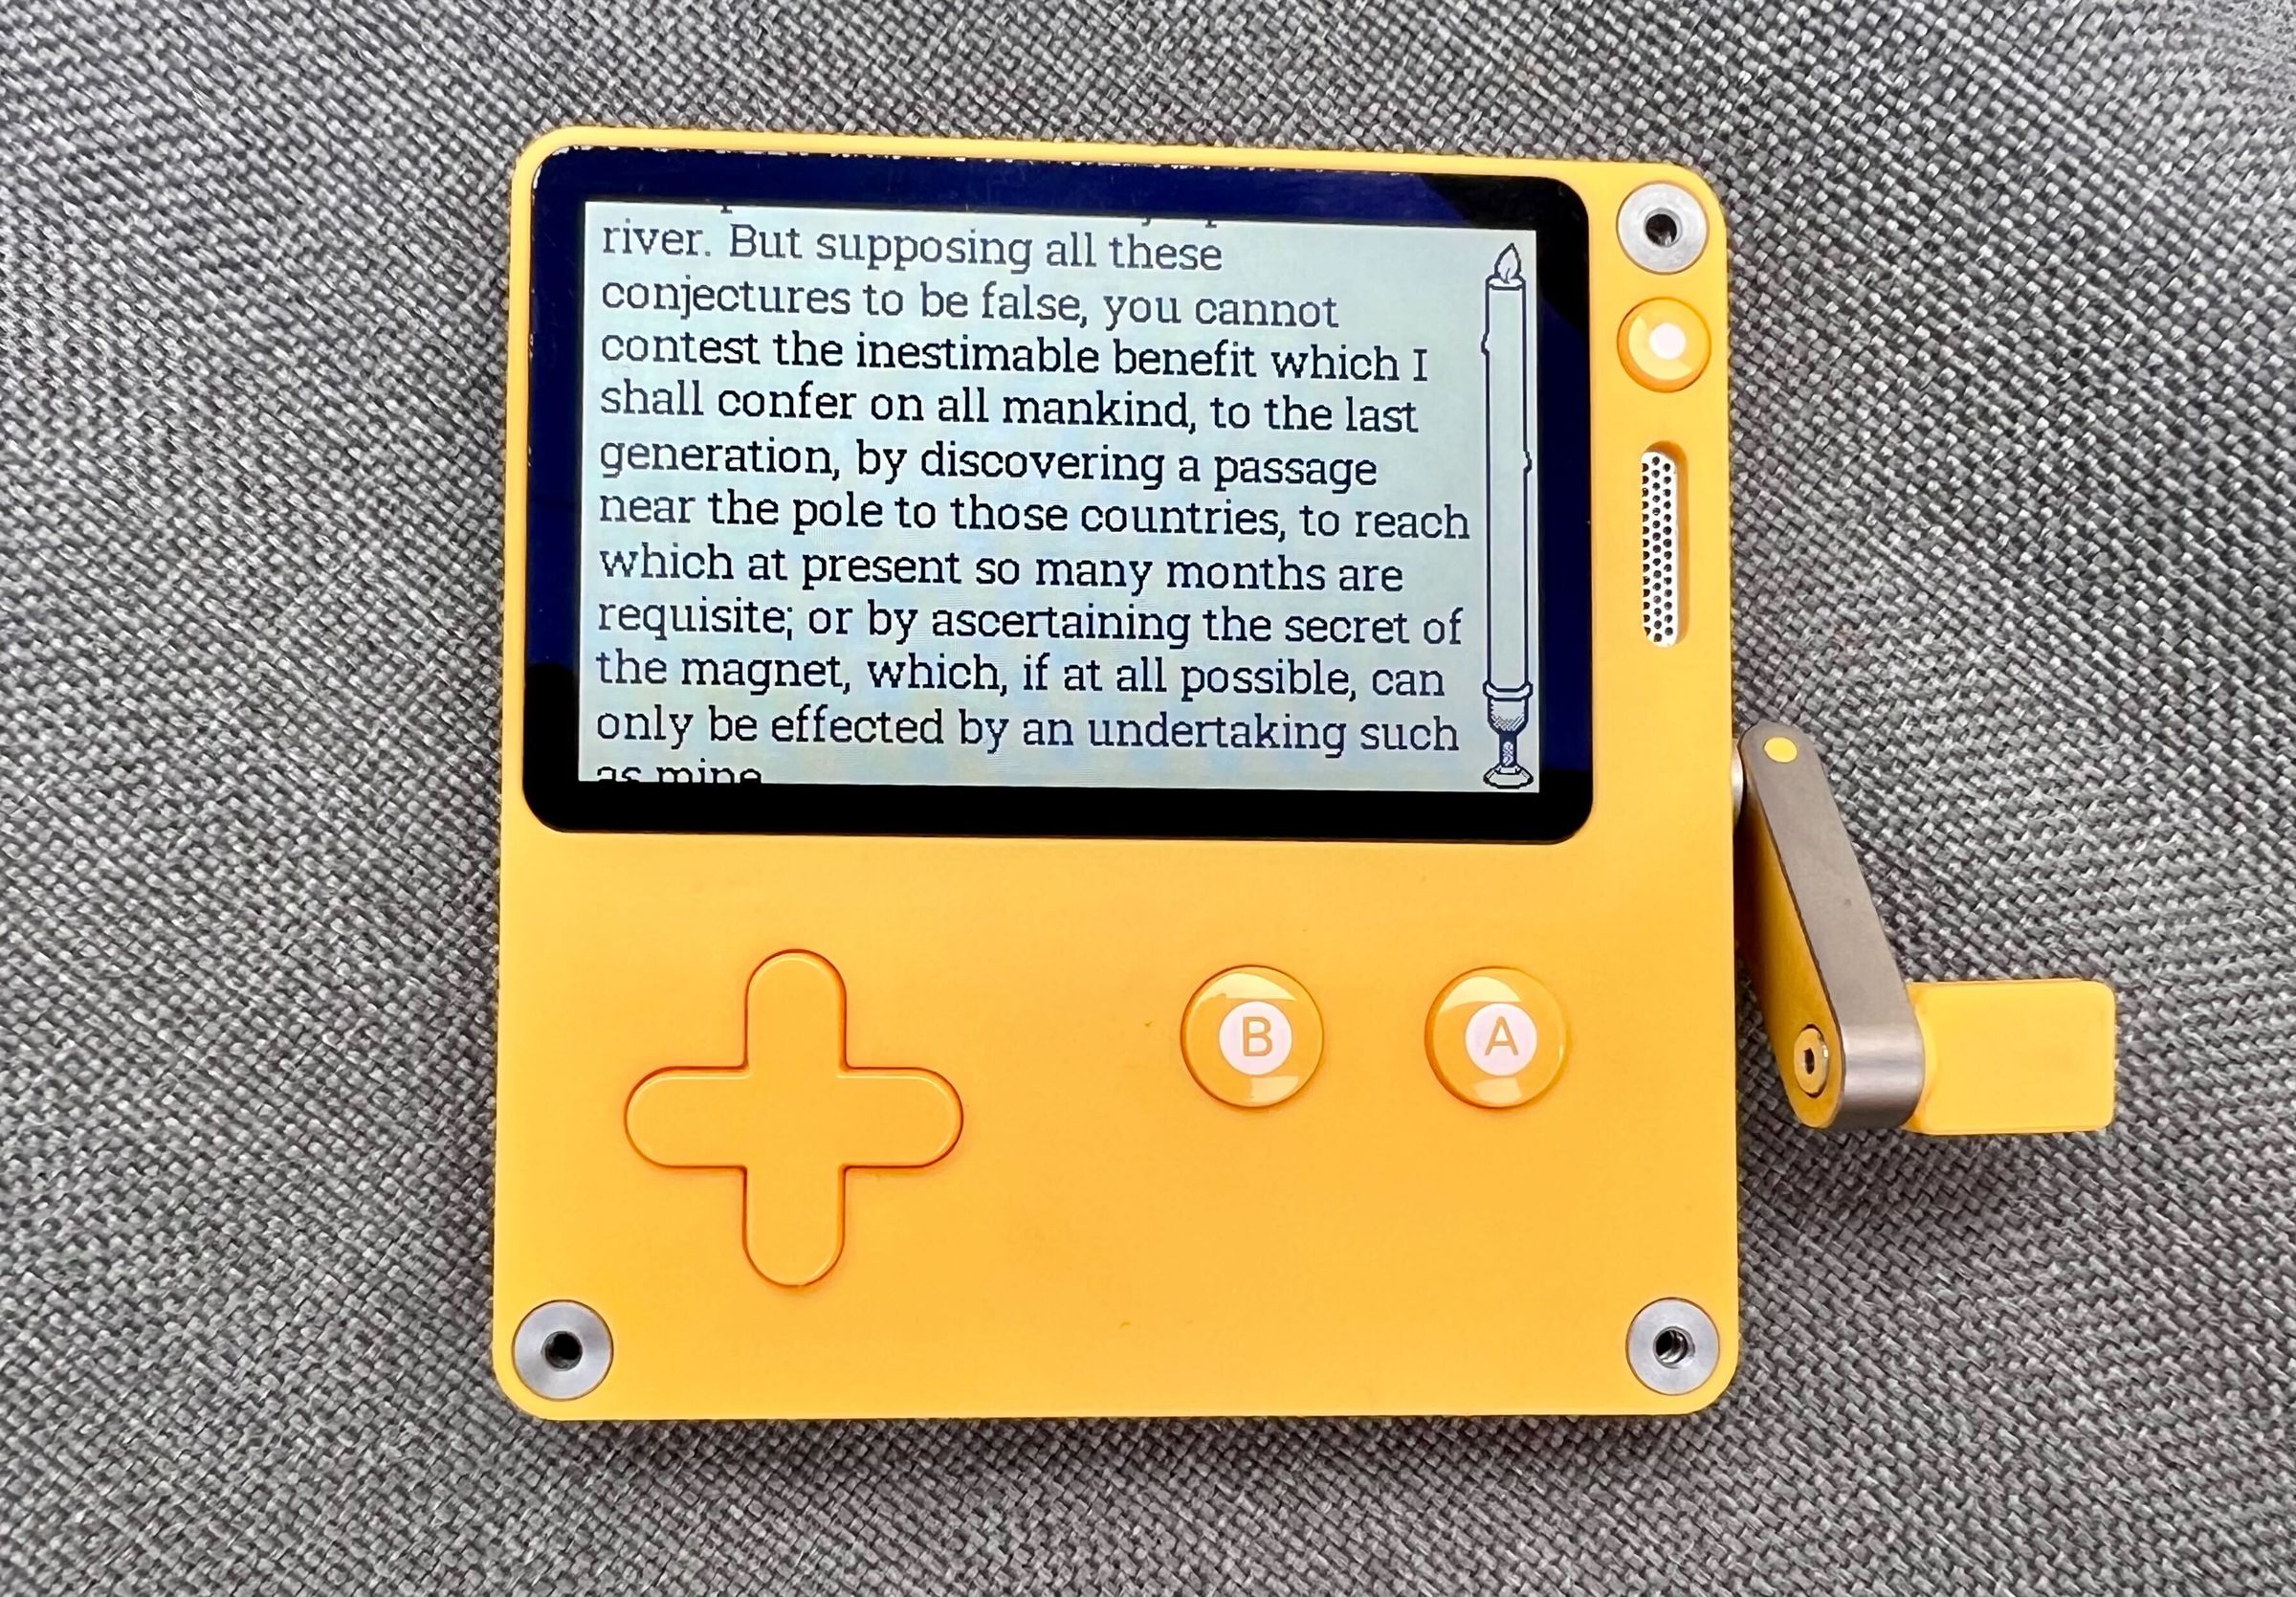 A photo of a book being read on the Playdate handheld.